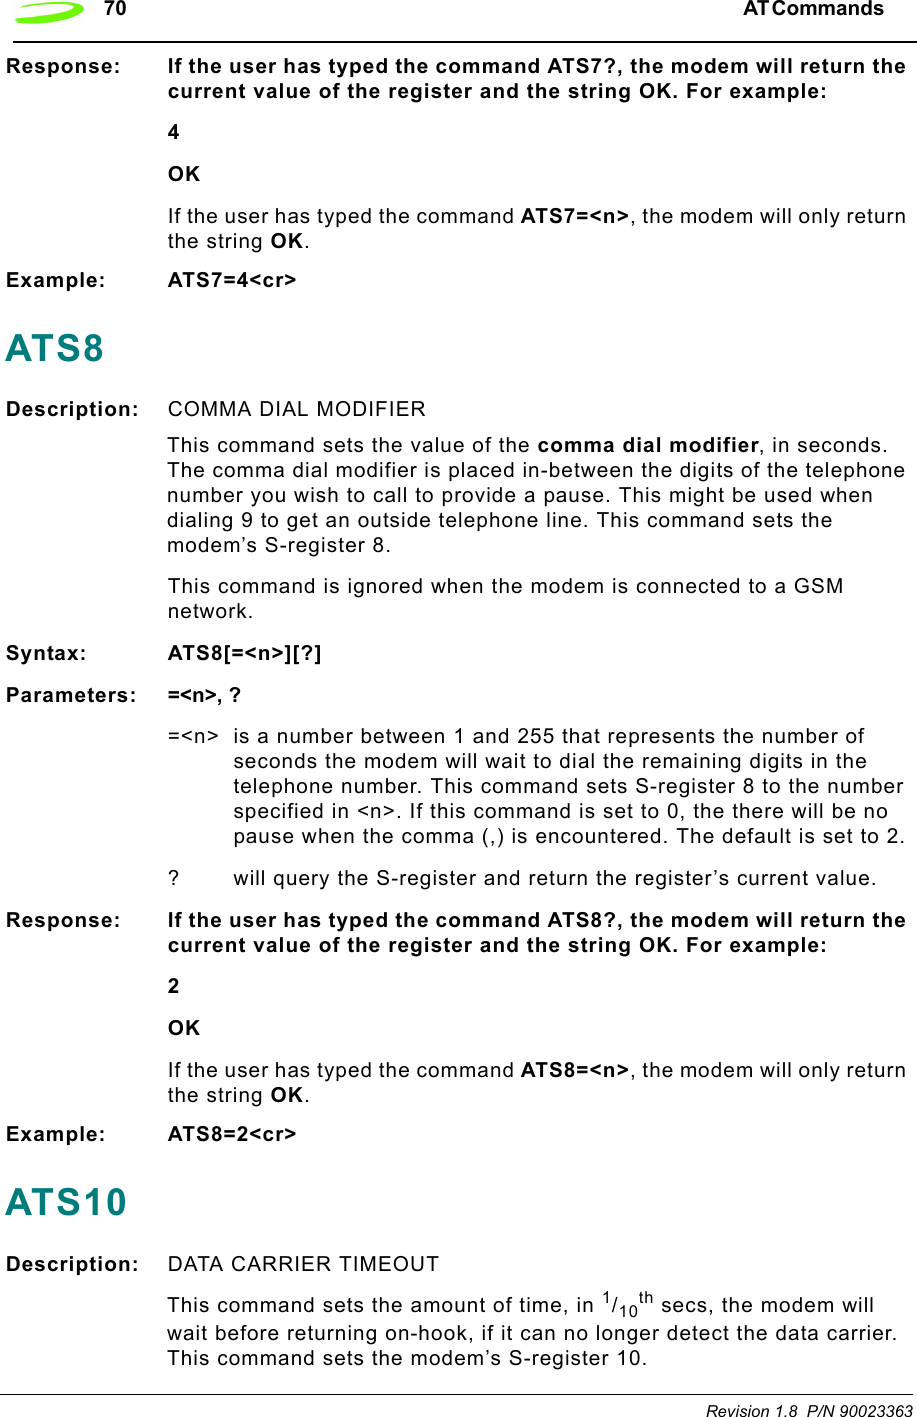 70 AT Commands  Revision 1.8  P/N 90023363Response: If the user has typed the command ATS7?, the modem will return the current value of the register and the string OK. For example:4OKIf the user has typed the command ATS7=&lt;n&gt;, the modem will only return the string OK.Example: ATS7=4&lt;cr&gt;ATS8Description: COMMA DIAL MODIFIERThis command sets the value of the comma dial modifier, in seconds. The comma dial modifier is placed in-between the digits of the telephone number you wish to call to provide a pause. This might be used when dialing 9 to get an outside telephone line. This command sets the modem’s S-register 8.This command is ignored when the modem is connected to a GSM network.Syntax: ATS8[=&lt;n&gt;][?]Parameters: =&lt;n&gt;, ?=&lt;n&gt; is a number between 1 and 255 that represents the number of seconds the modem will wait to dial the remaining digits in the telephone number. This command sets S-register 8 to the number specified in &lt;n&gt;. If this command is set to 0, the there will be no pause when the comma (,) is encountered. The default is set to 2.? will query the S-register and return the register’s current value.Response: If the user has typed the command ATS8?, the modem will return the current value of the register and the string OK. For example:2OKIf the user has typed the command ATS8=&lt;n&gt;, the modem will only return the string OK.Example: ATS8=2&lt;cr&gt;ATS10Description: DATA CARRIER TIMEOUT This command sets the amount of time, in 1/10th secs, the modem will wait before returning on-hook, if it can no longer detect the data carrier. This command sets the modem’s S-register 10.